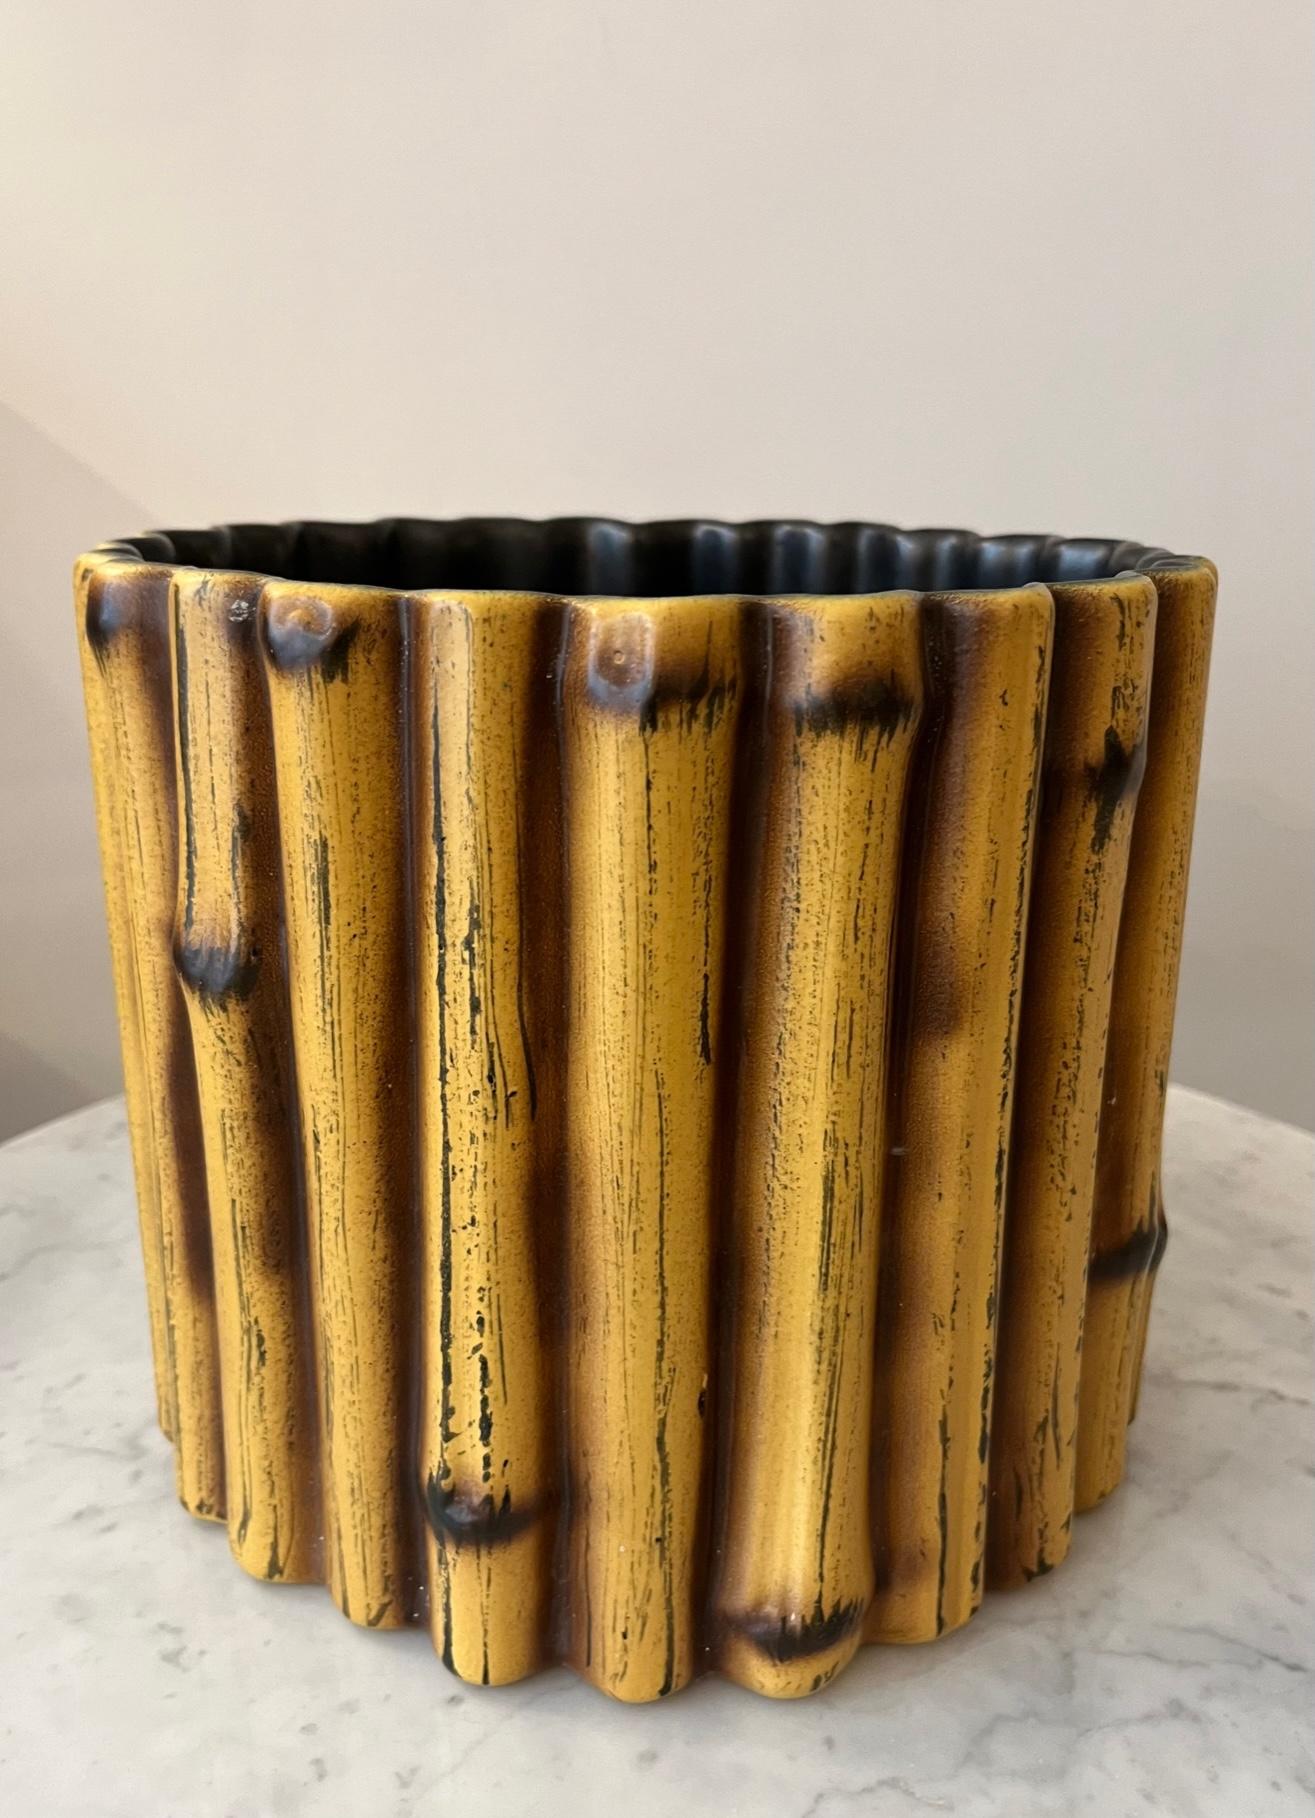 Earthenware cachepot by Pol Chambost (1906-1983) 
Cylindrical form, the body is formed of stylized bamboos 
Glazed with yellow of Naples heightened with ochre and brown, black interior.
Signed underneath : 